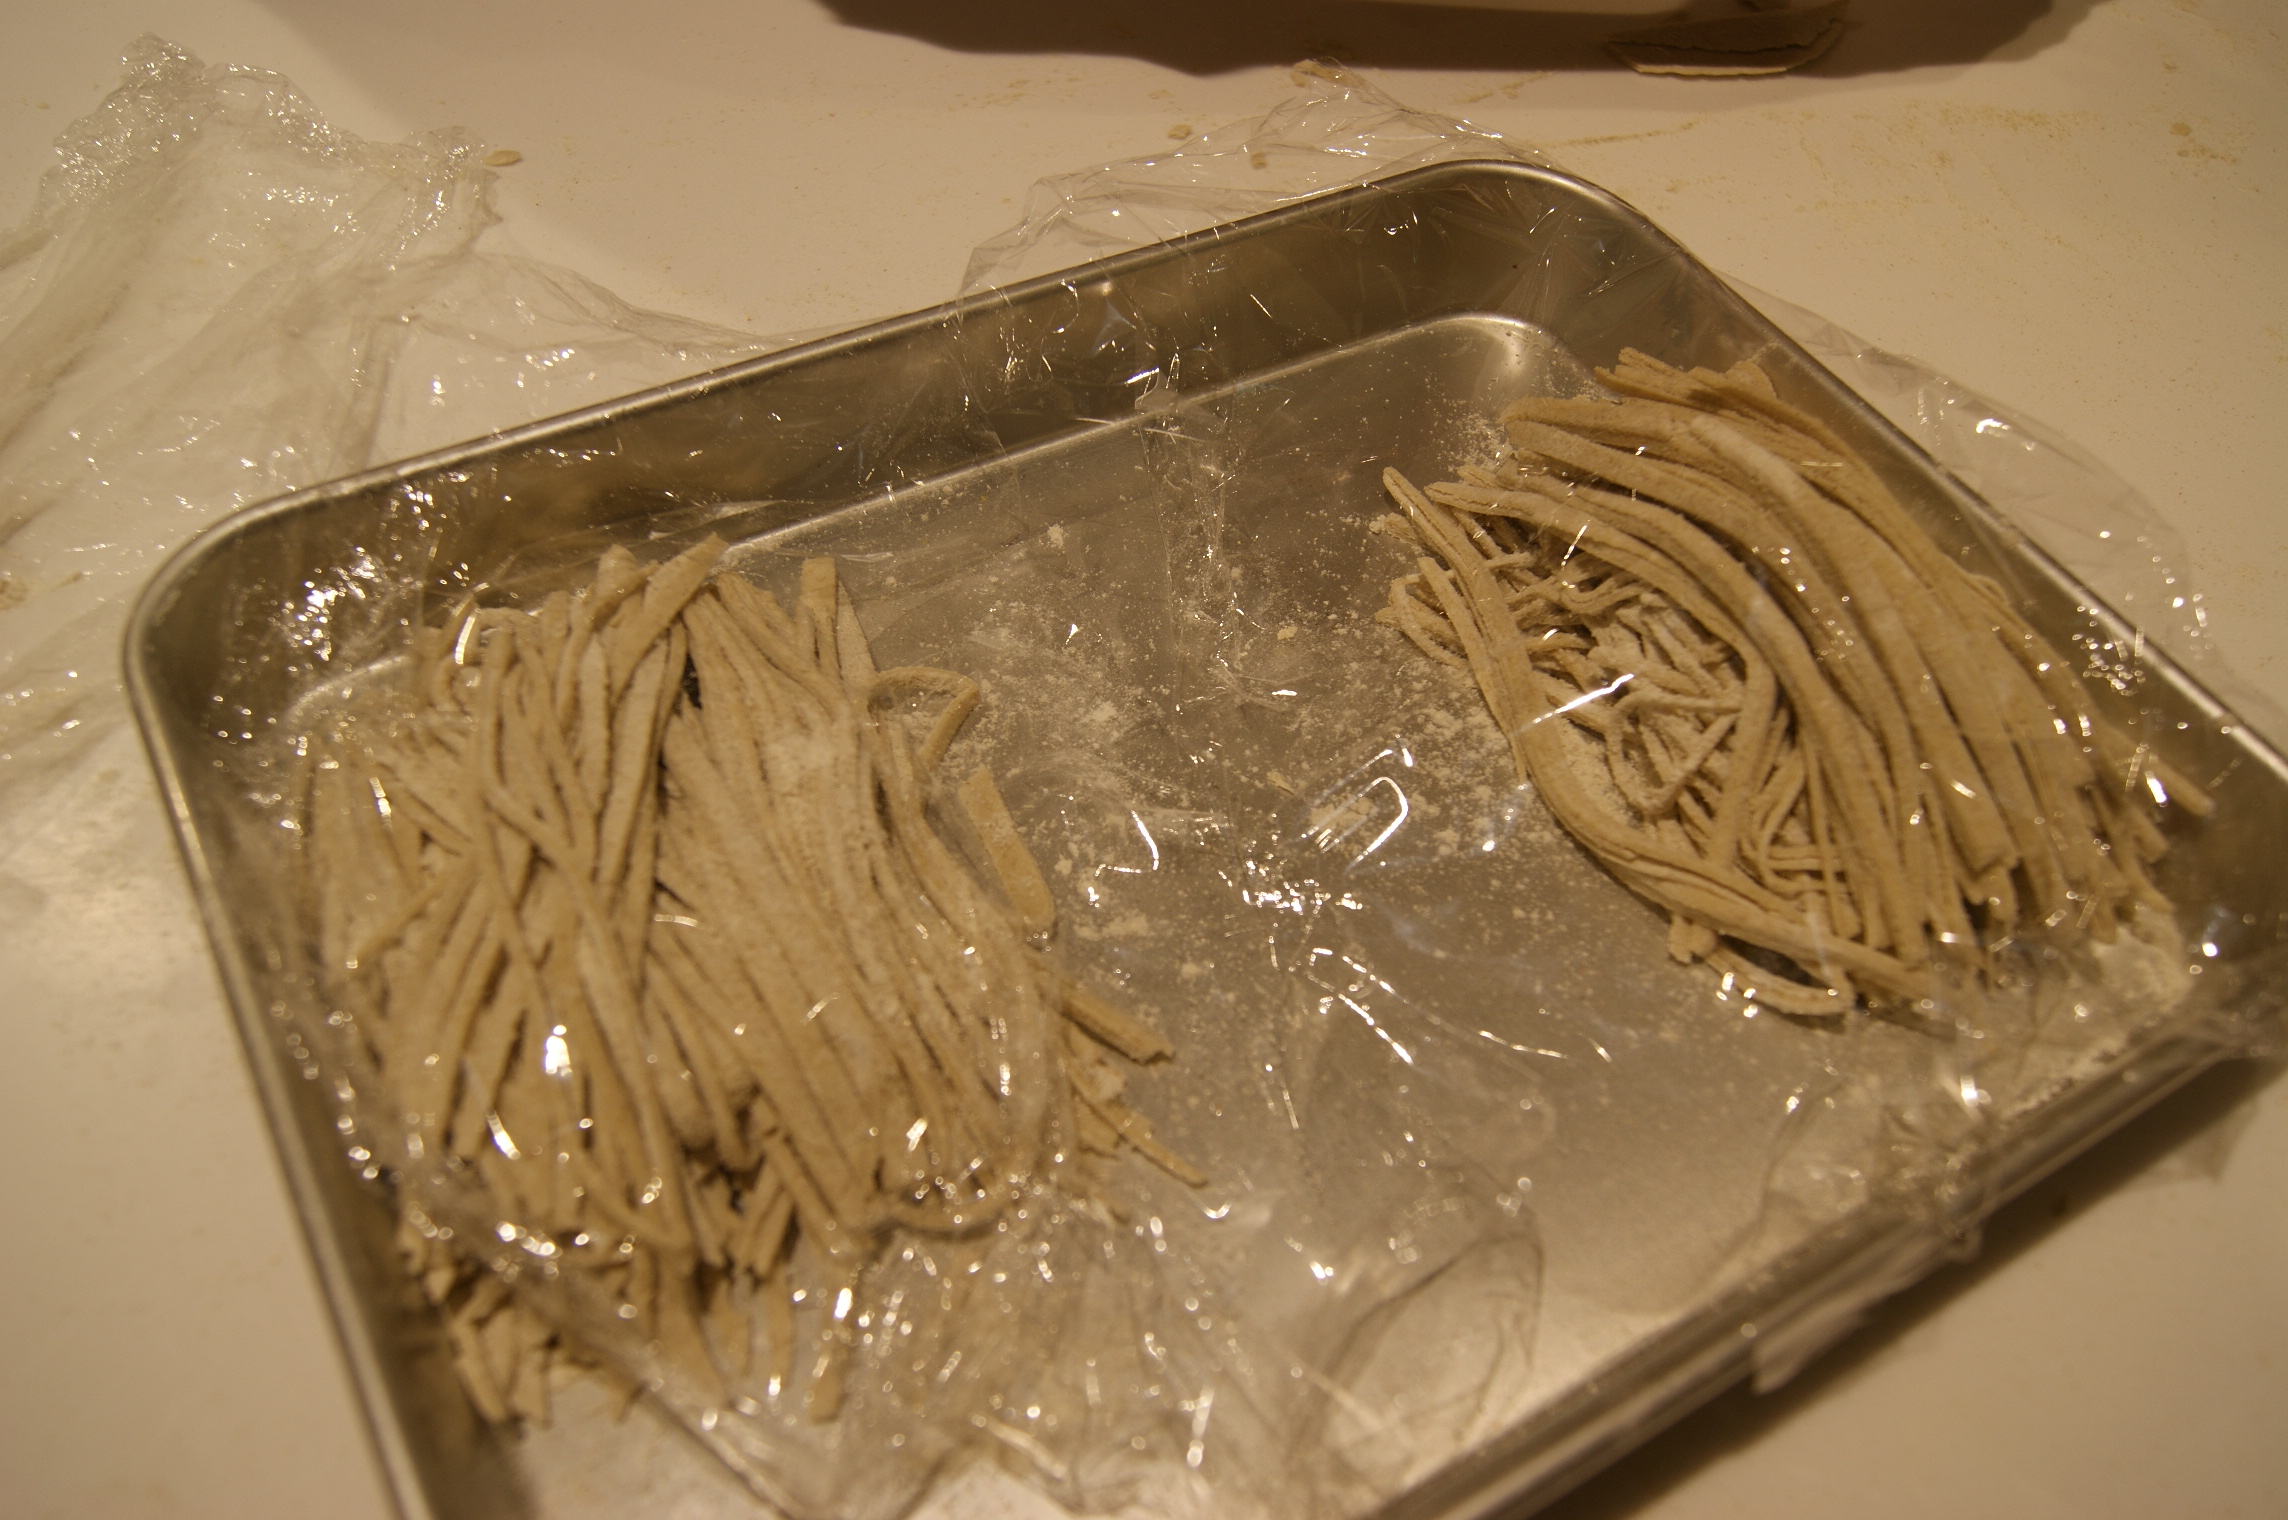 Very fun to explore the world of soba